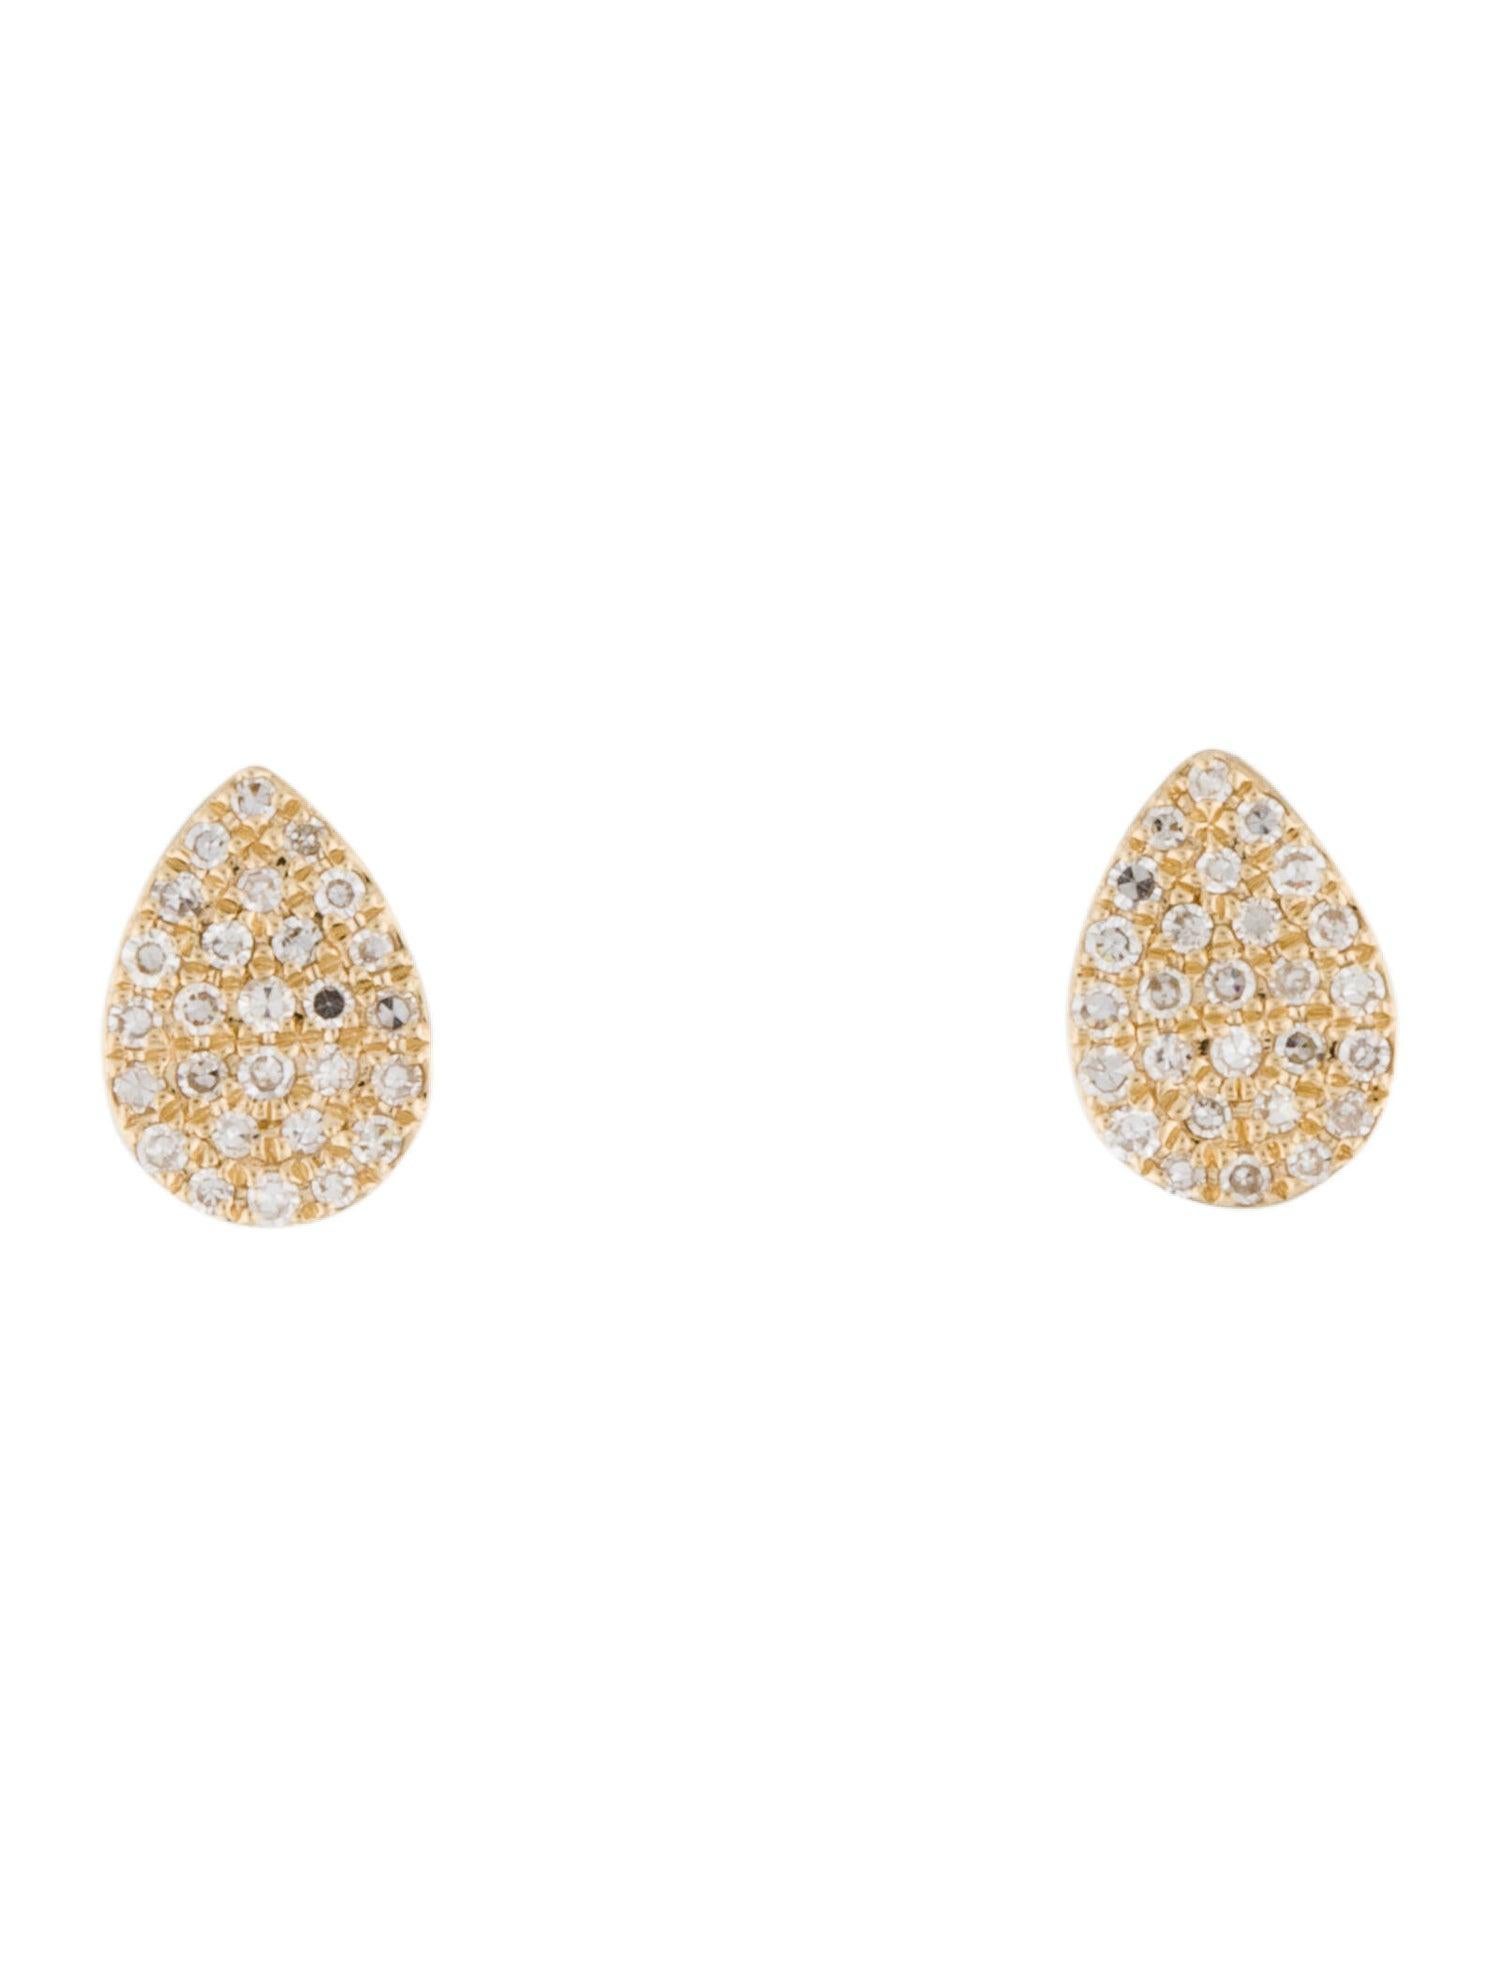 Quality Earrings Set: Made from real 14k gold and white sparkling diamonds approximately 0.18 ct. Certified diamonds, available in pink, white, and yellow, - Measurment 0.25